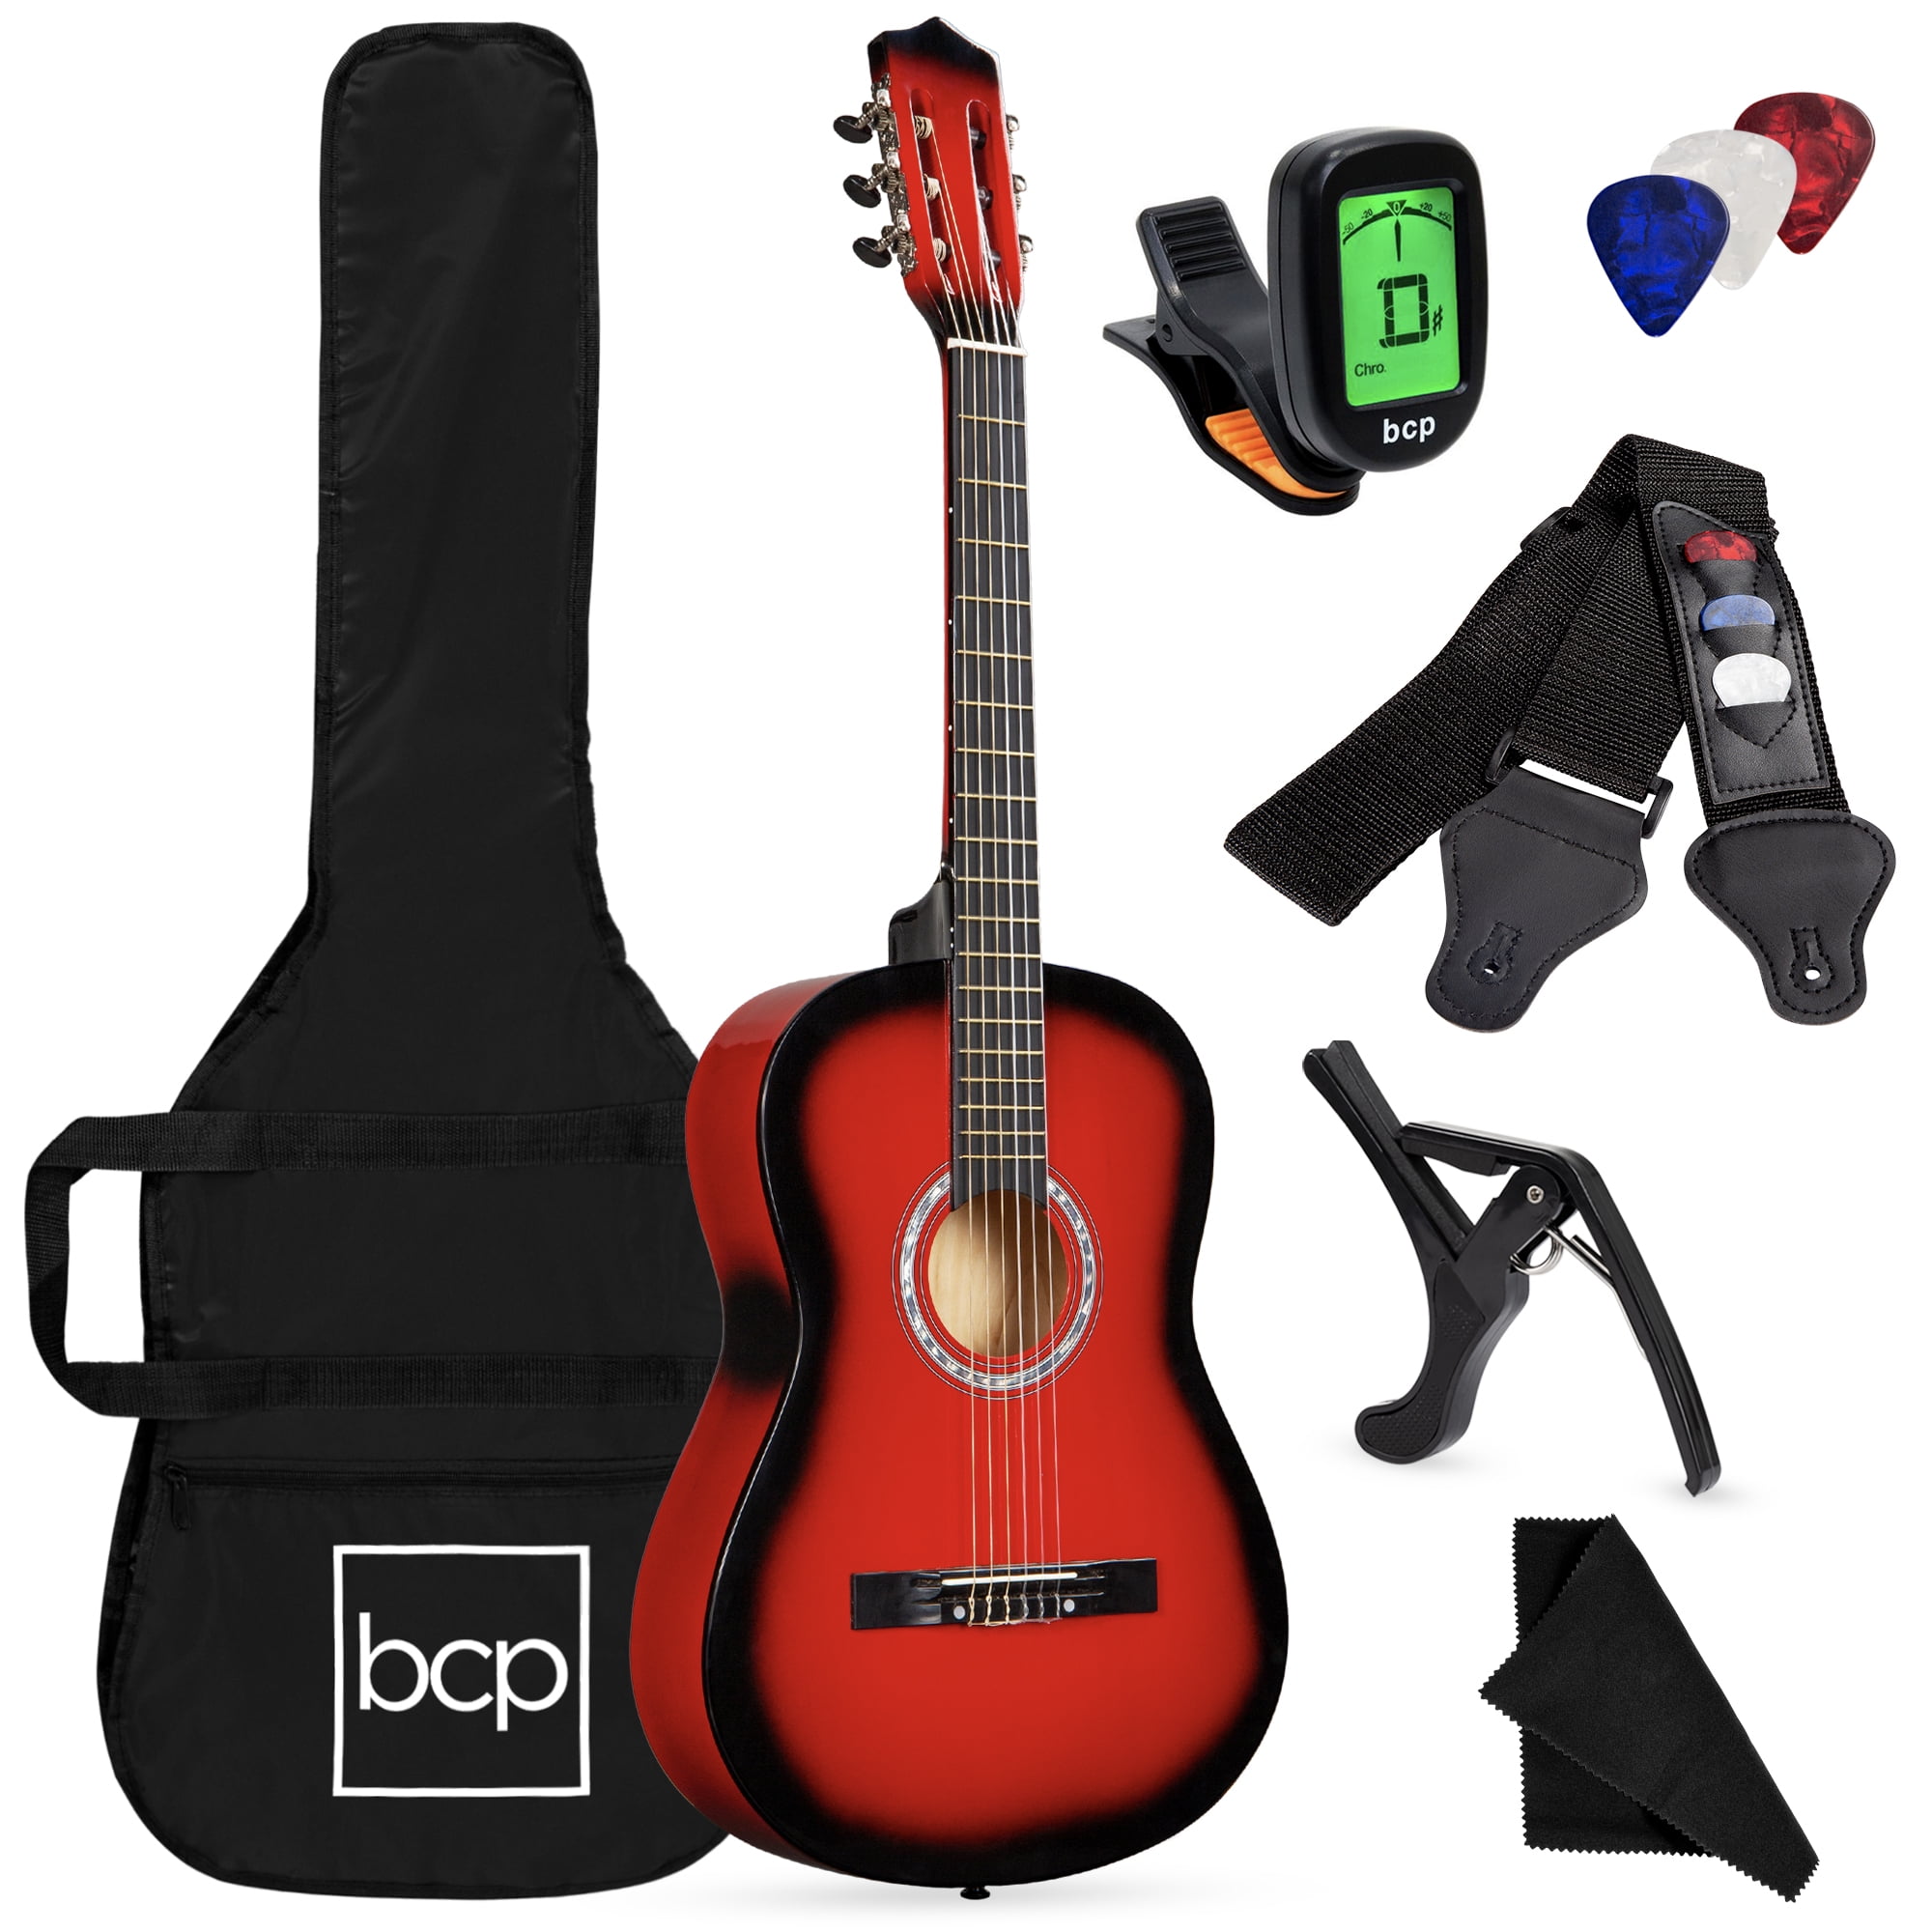 Picks 30 Inch Acoustic Guitar Junior Acoustic Guitar Starer Kit with Carrying Bag Natural Strap E-Tuner 